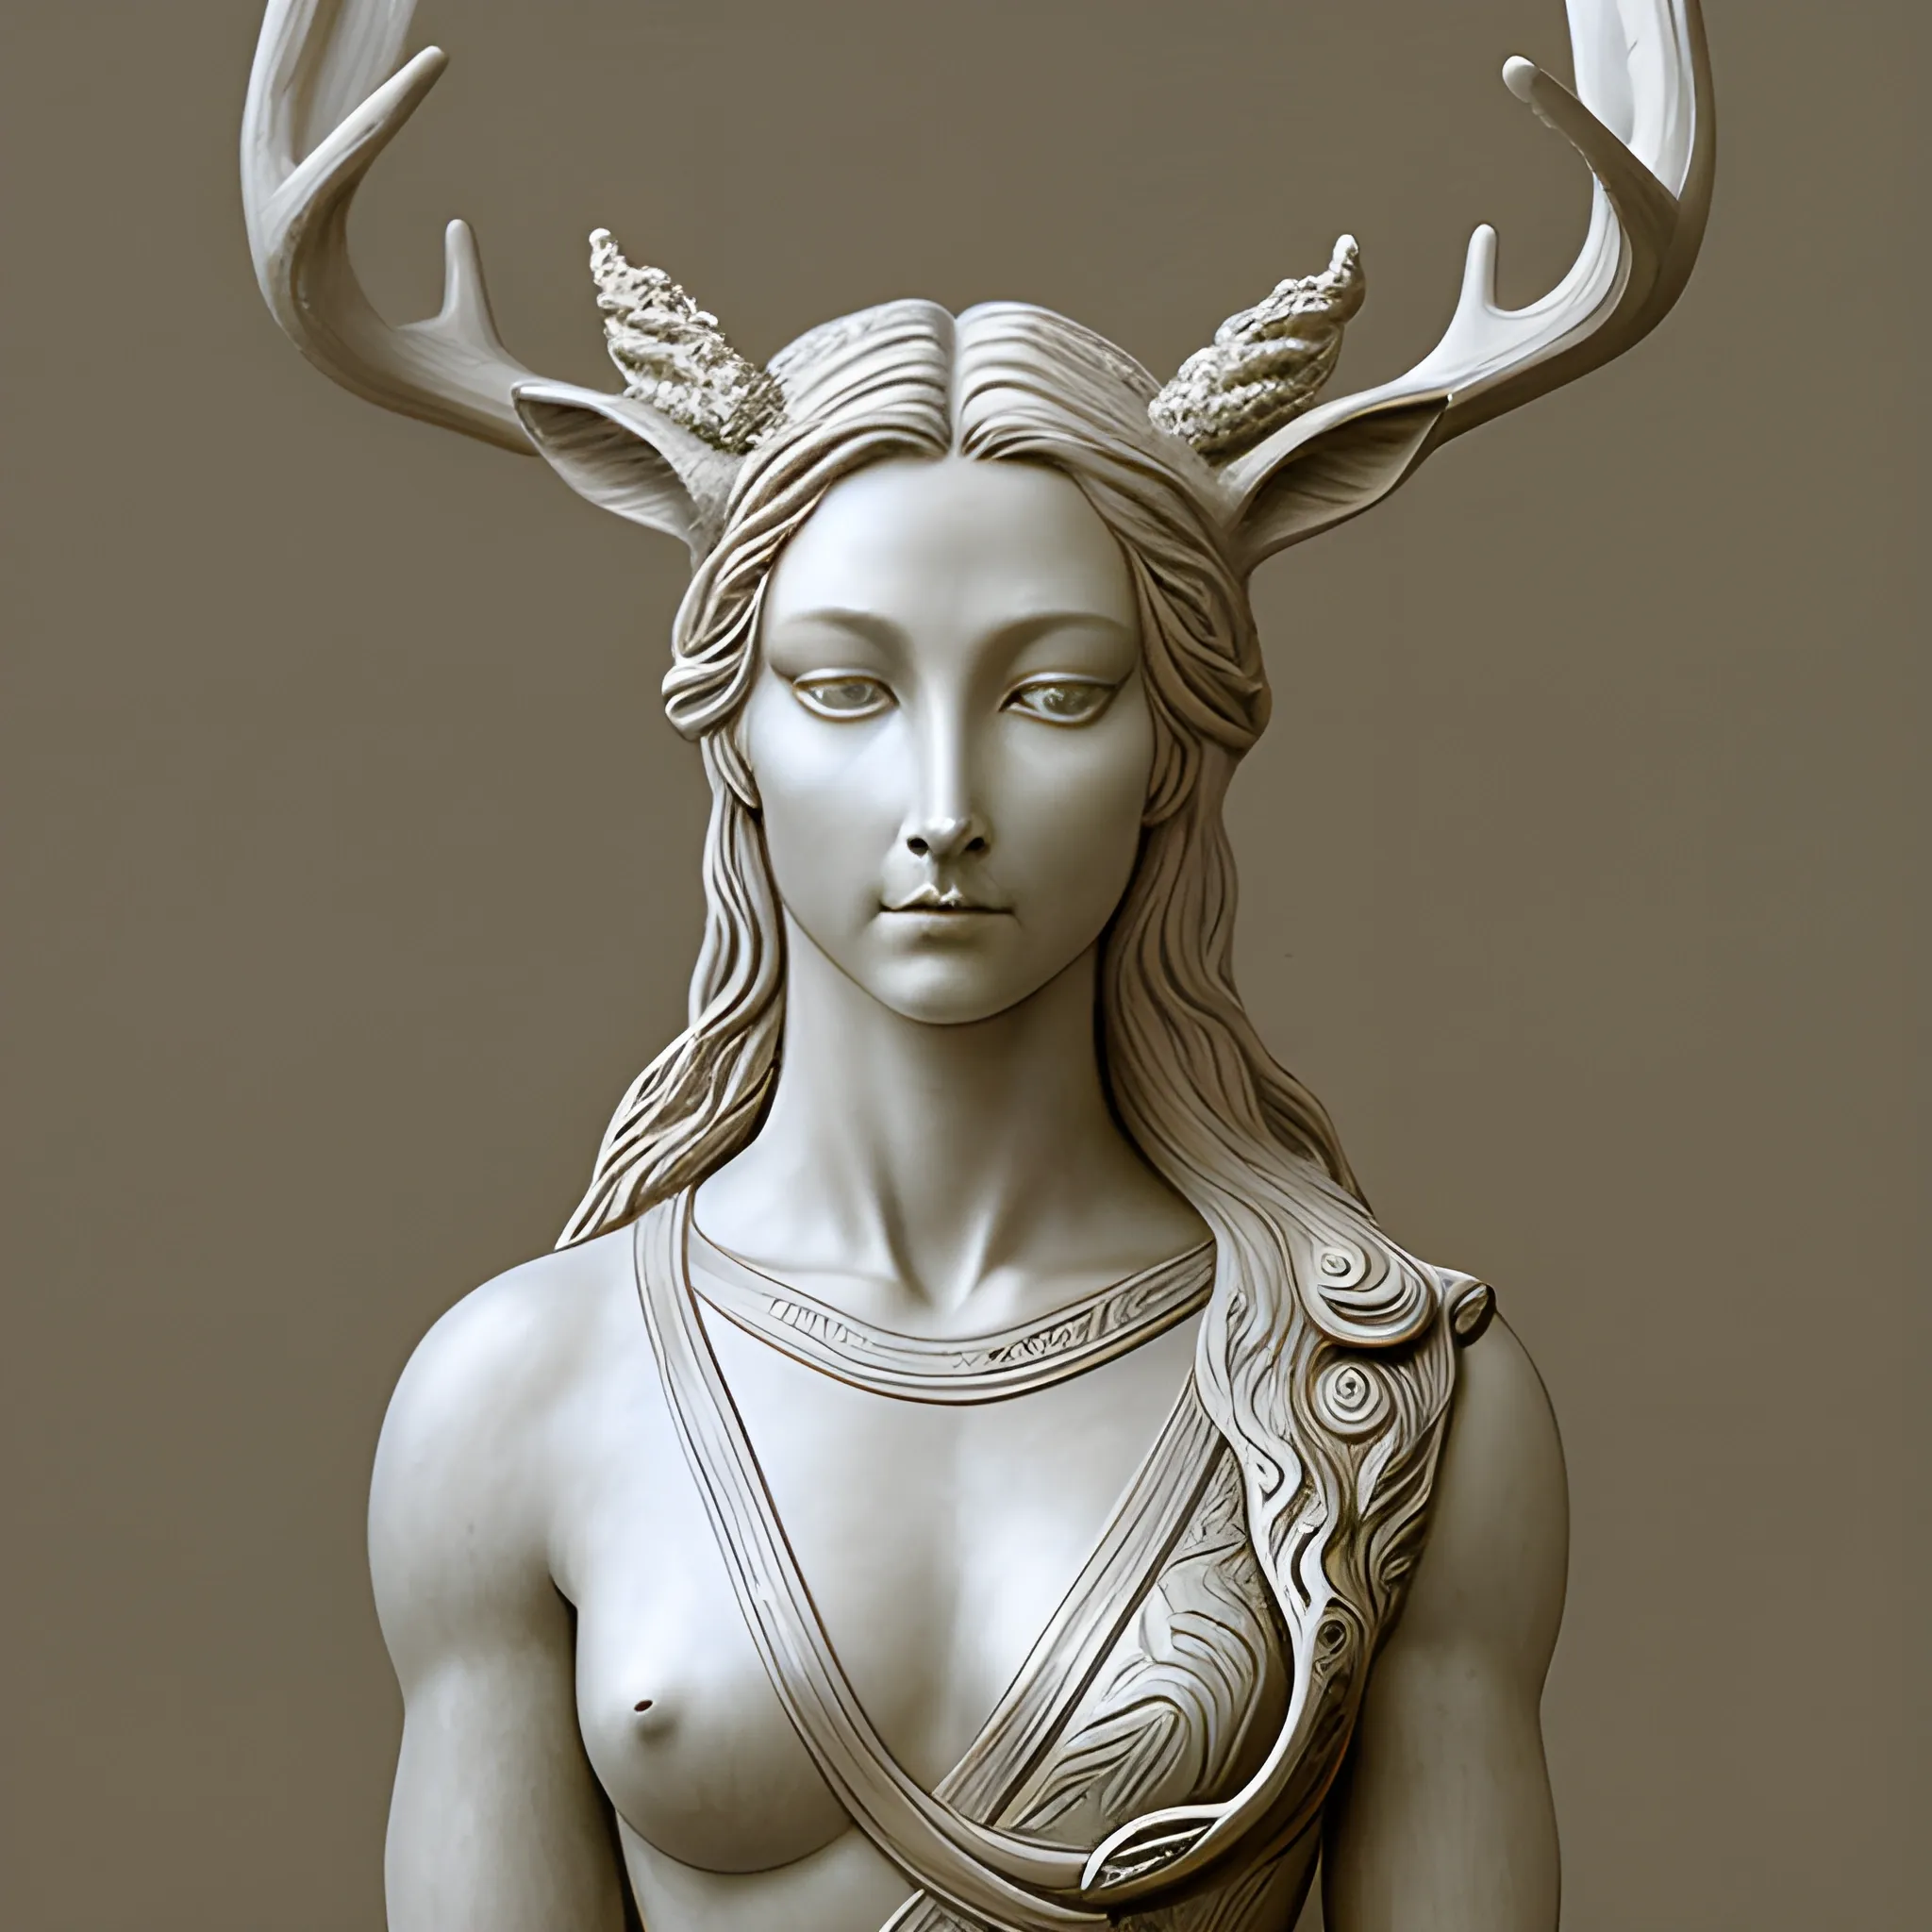 , Pencil Sketch A hyperrealistic representation of a female goddess of deer and plants, riding a creature that fuses the elegance of the deer with the strength of the horse, created by a prodigious contemporary sculptor of the 21st century